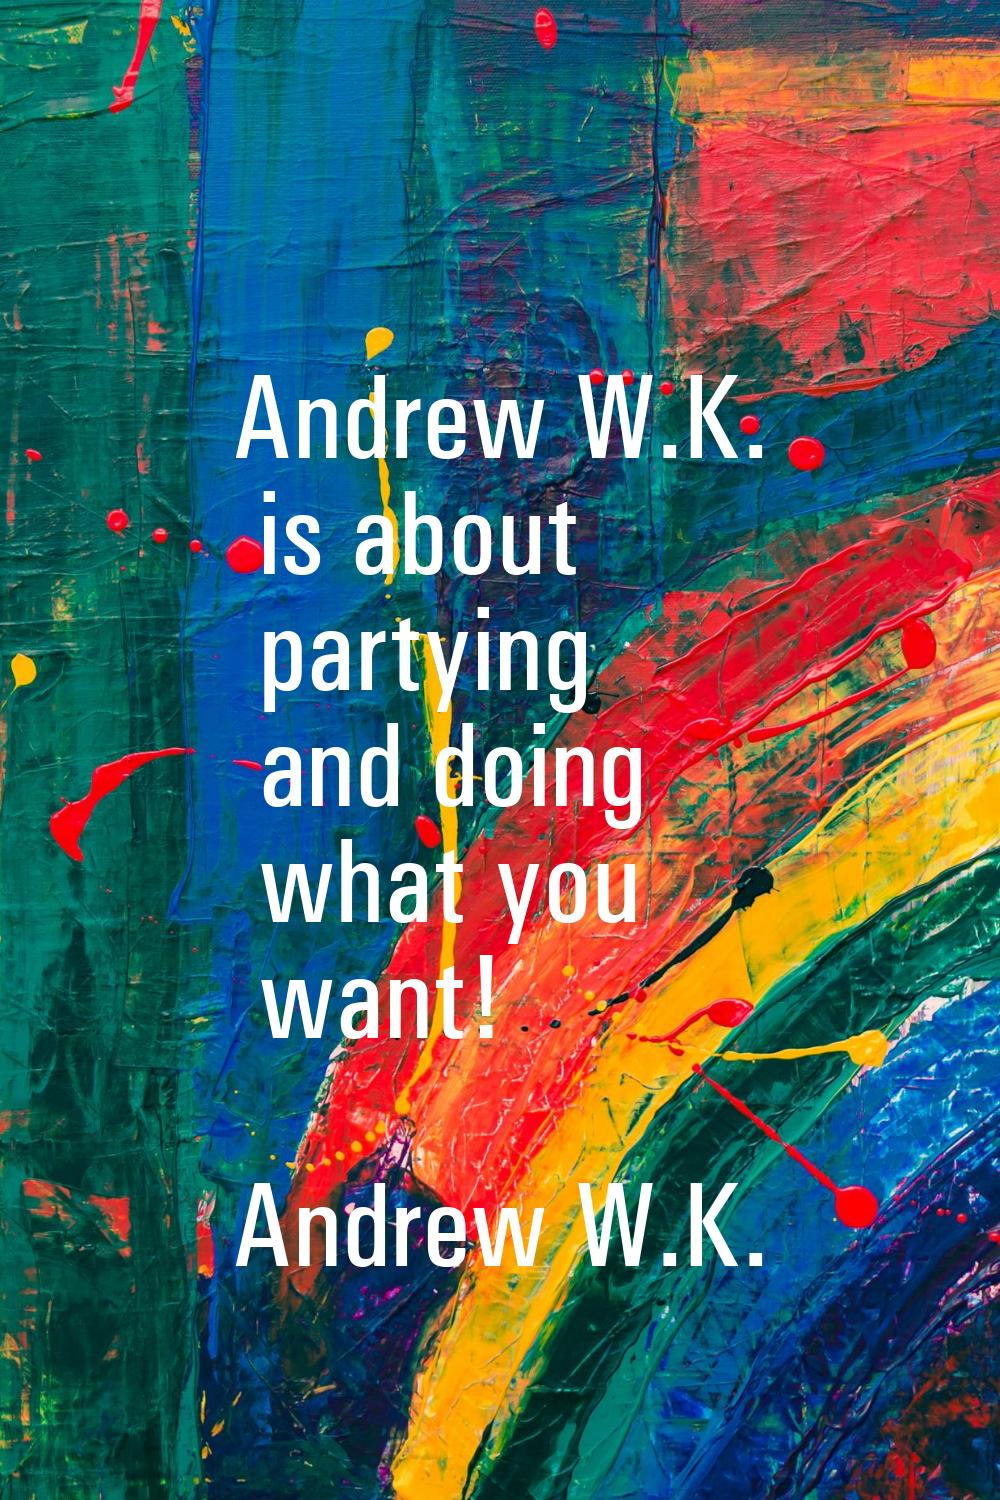 Andrew W.K. is about partying and doing what you want!